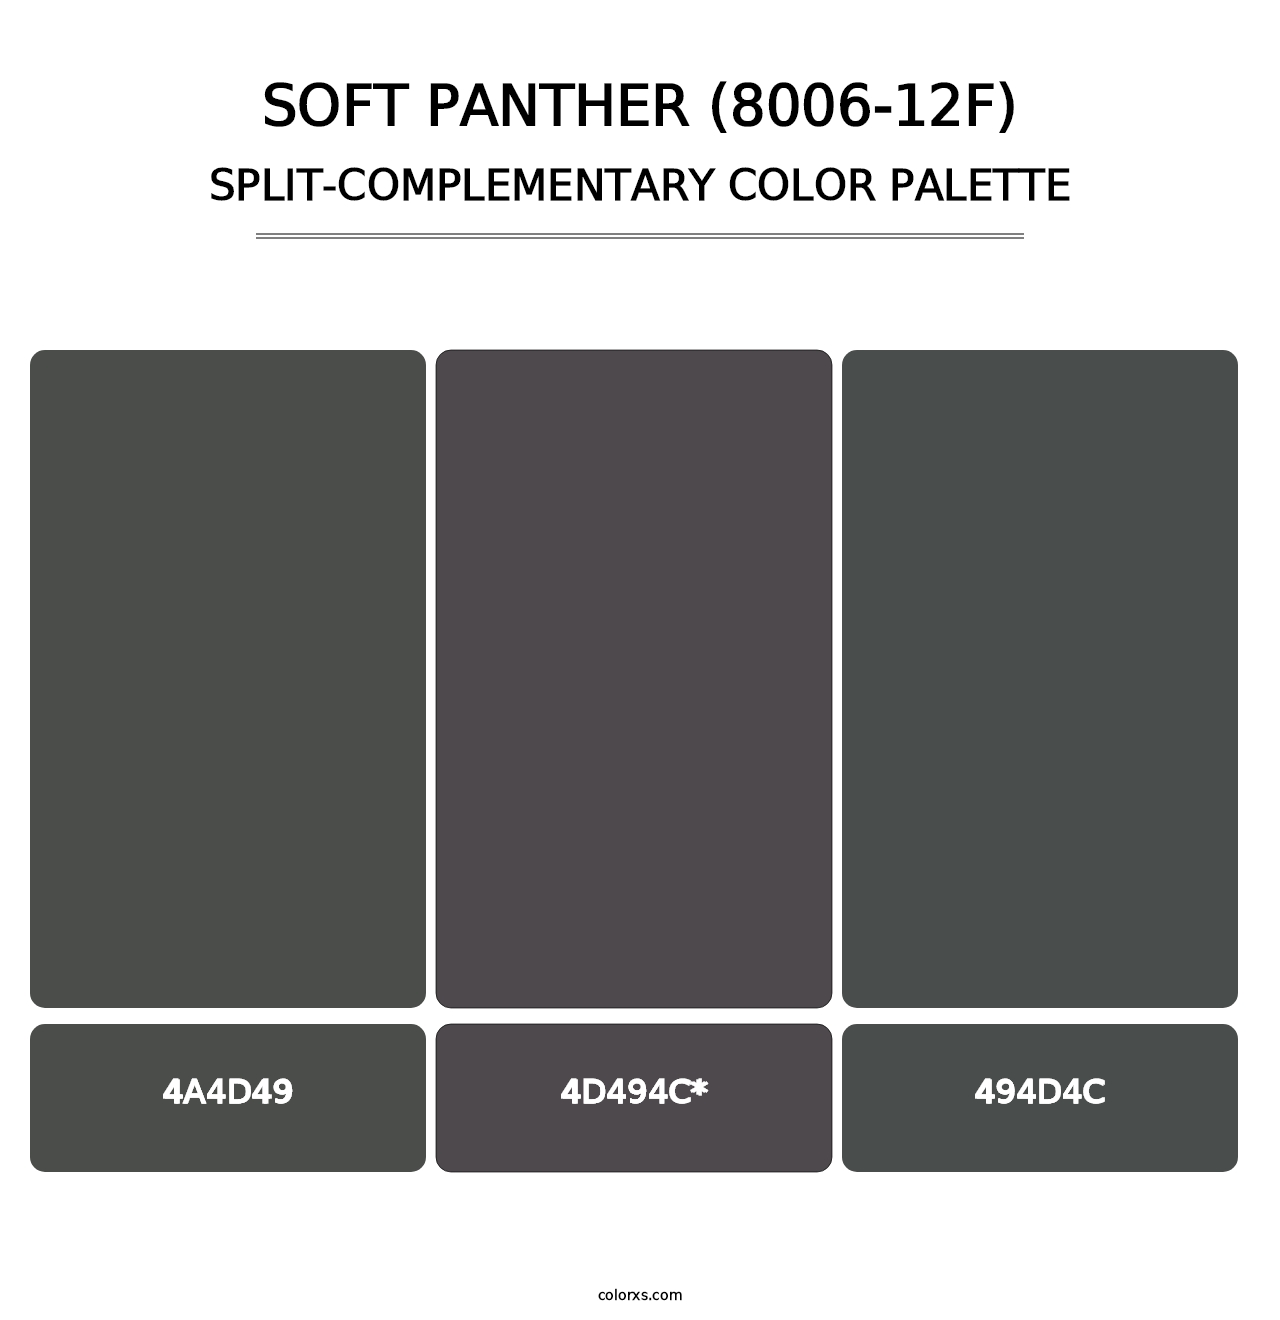 Soft Panther (8006-12F) - Split-Complementary Color Palette